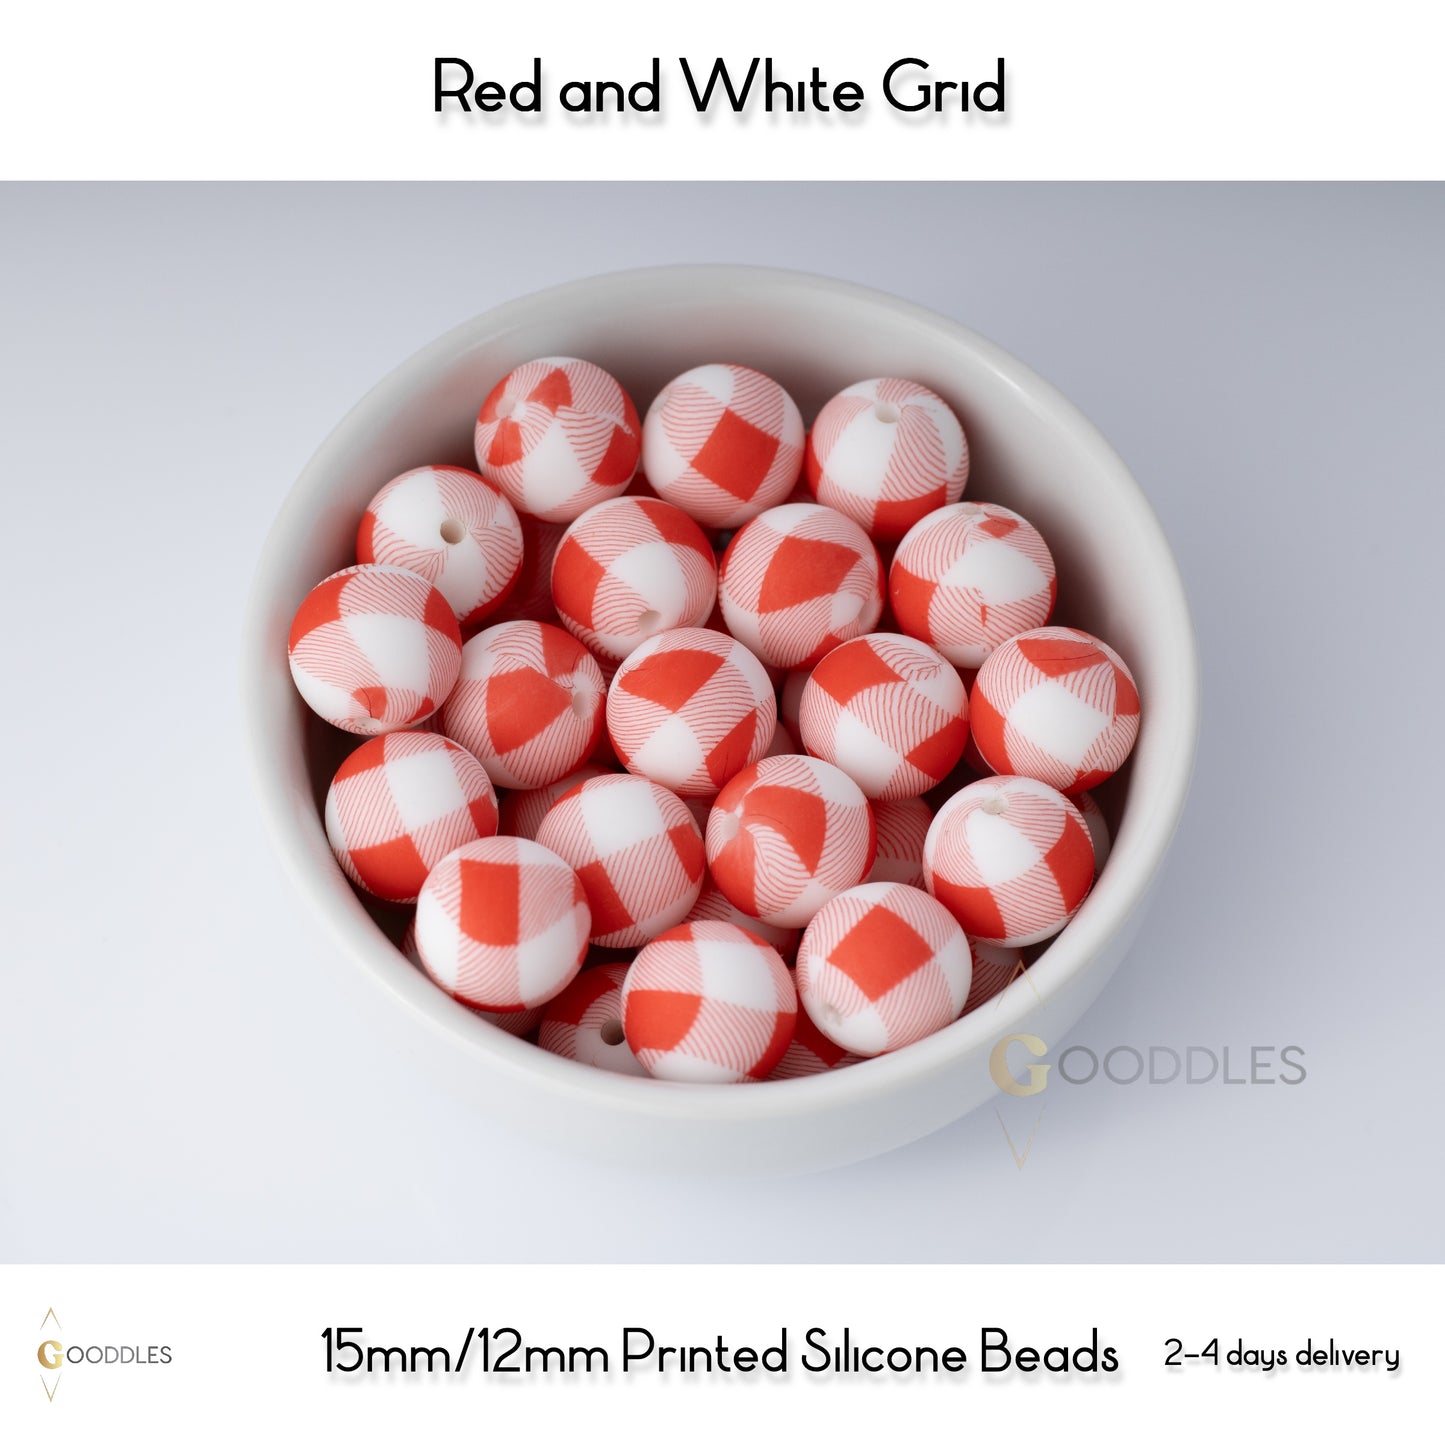 5pcs, Red and White Grid Silicone Beads Printed Round Silicone Beads